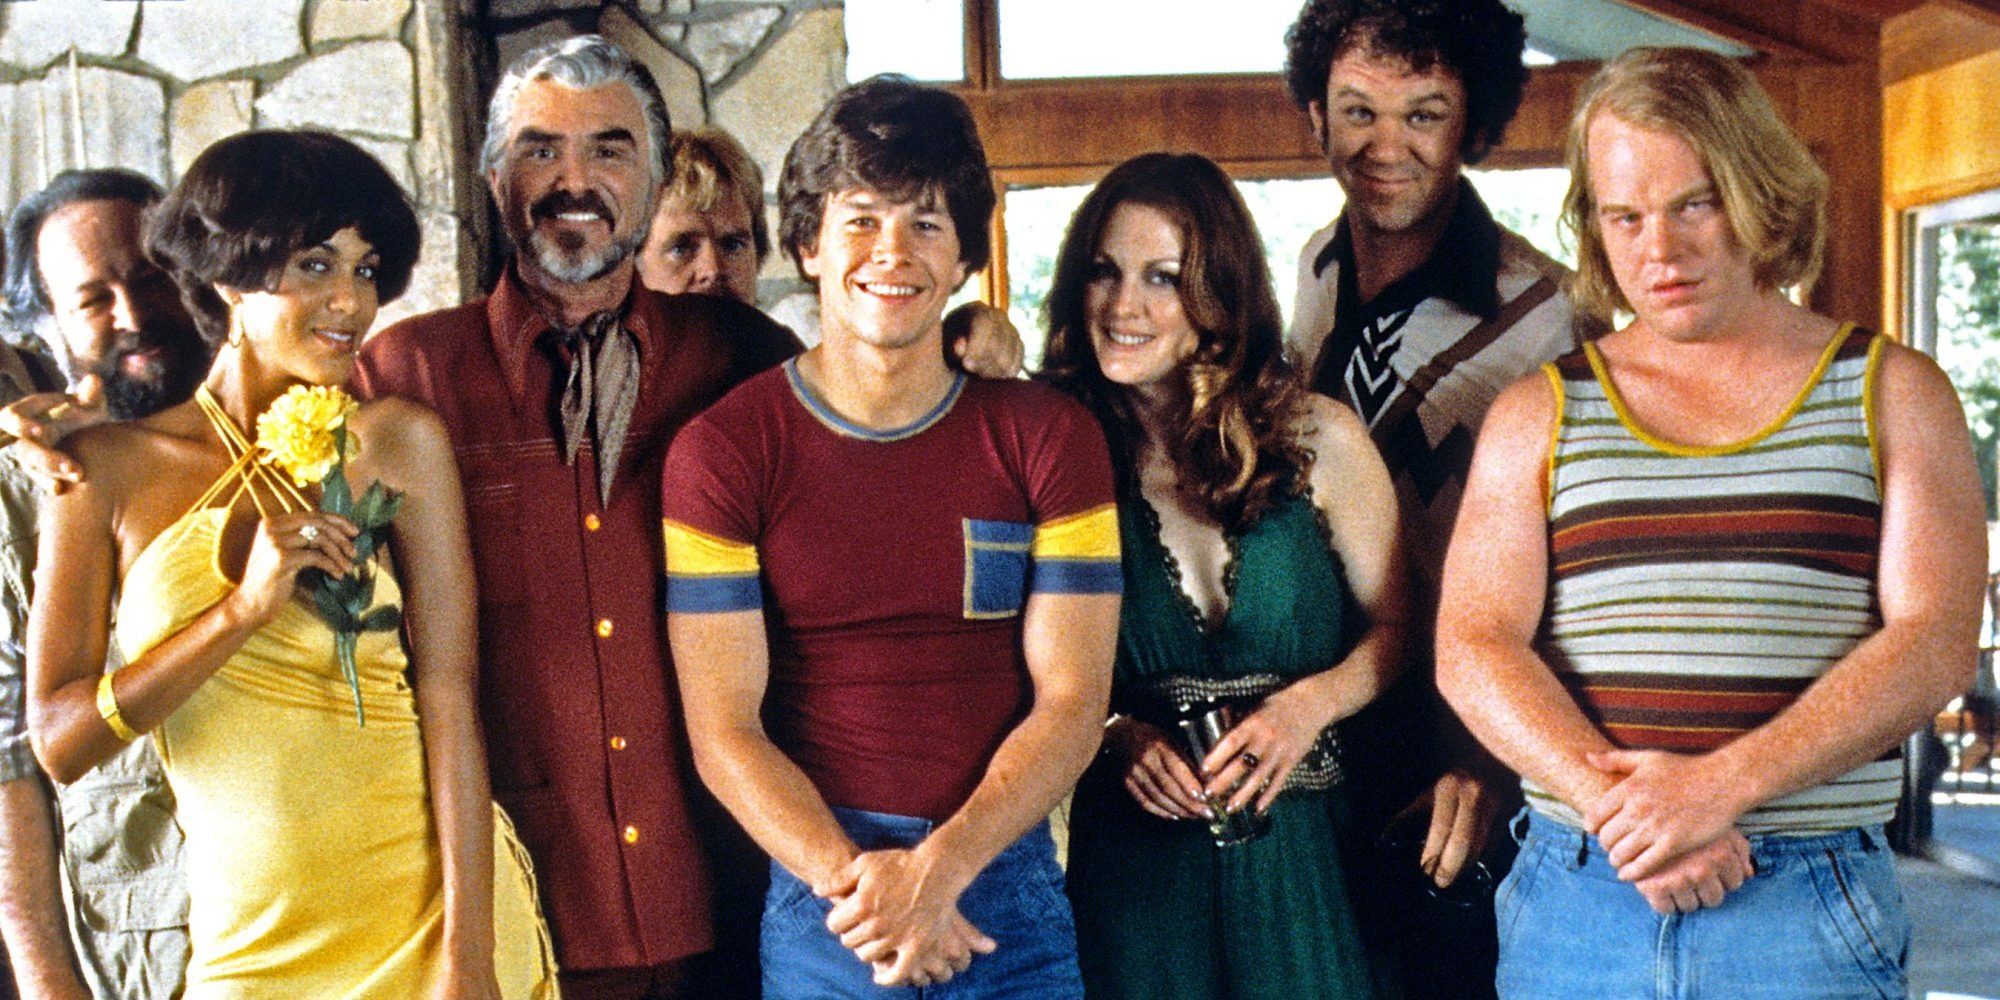 The cast of 'Boogie Nights'